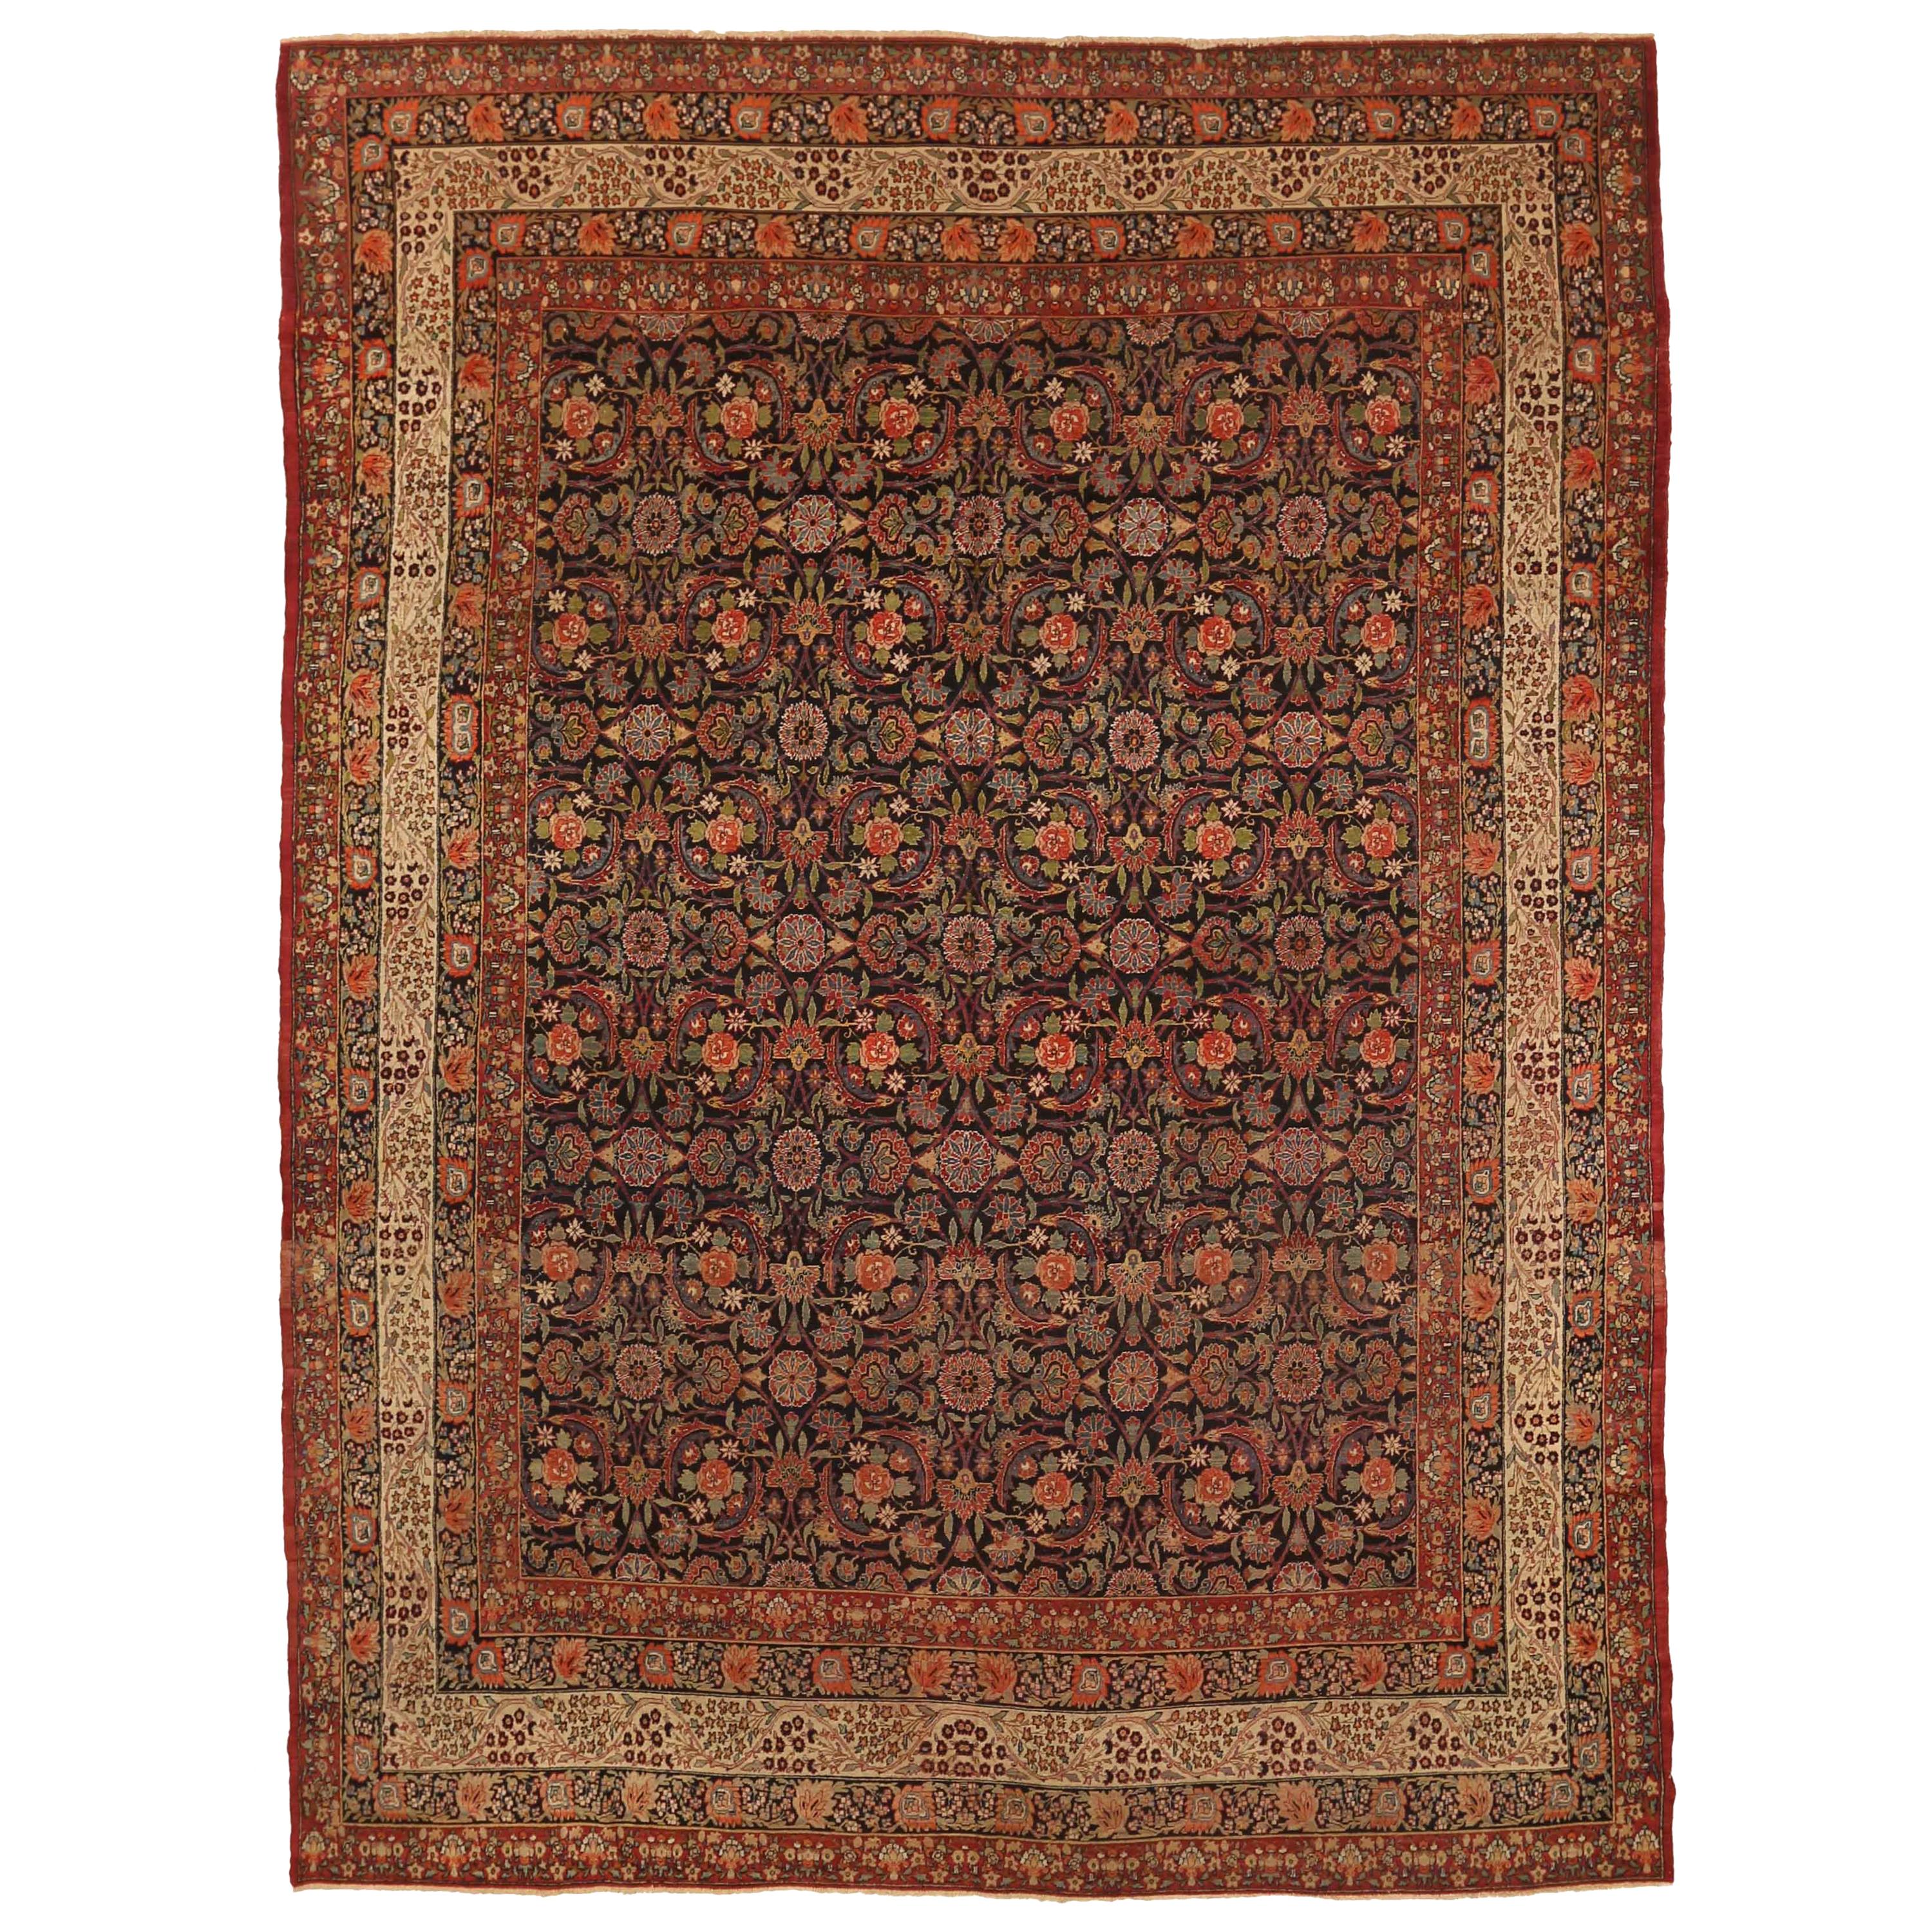 1890s Antique Persian Kerman Rug with Black and Green Flower Field Design For Sale